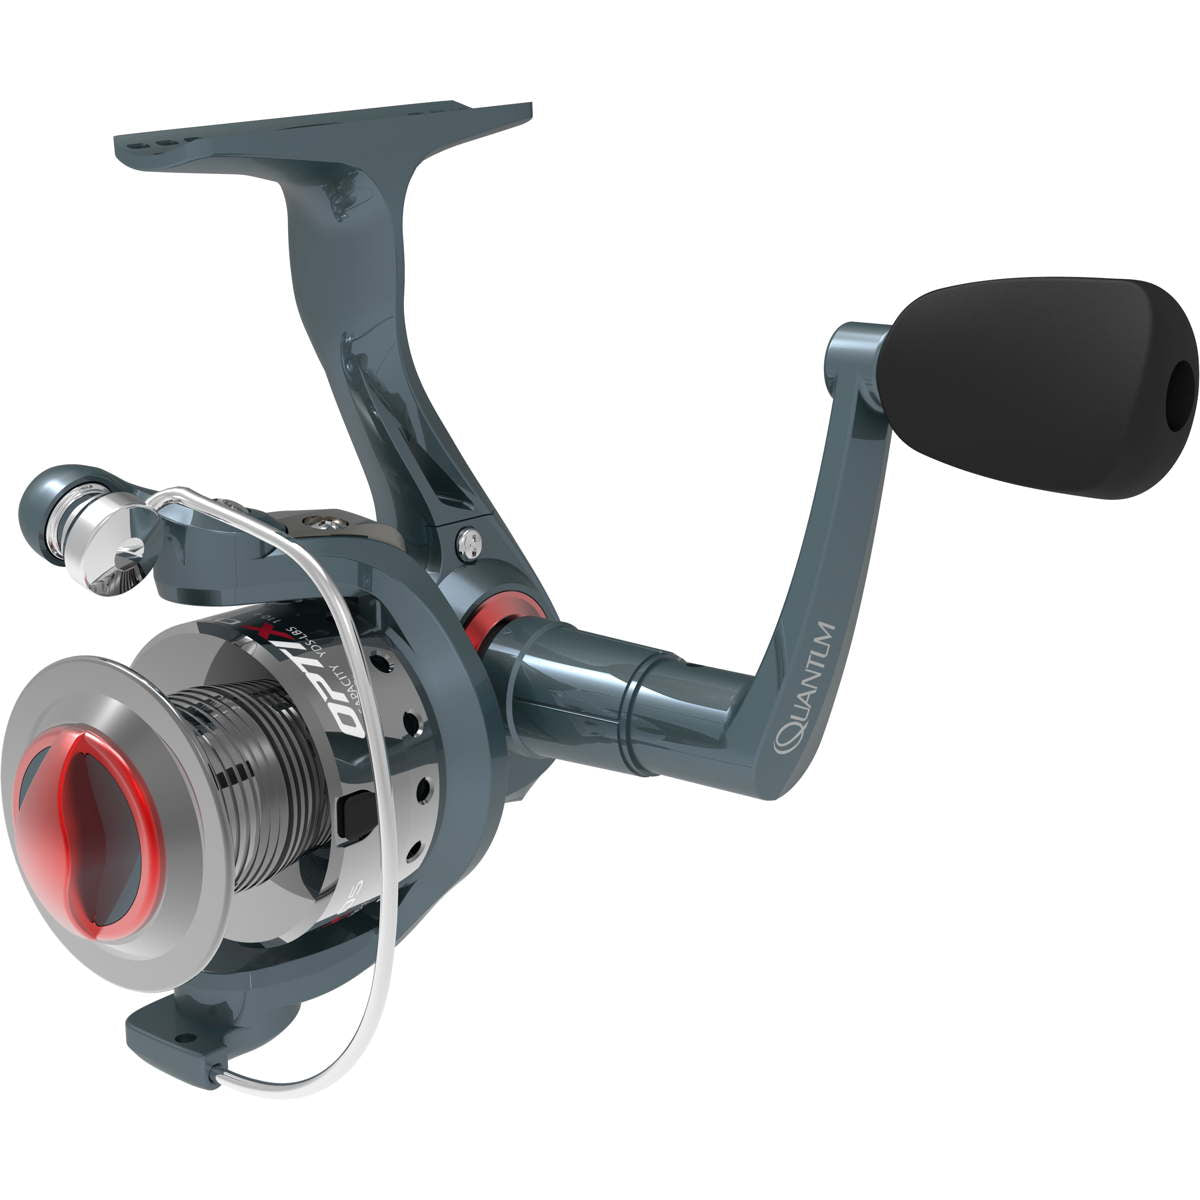 Photo of Quantum Optix Spinning Reel for sale at United Tackle Shops.